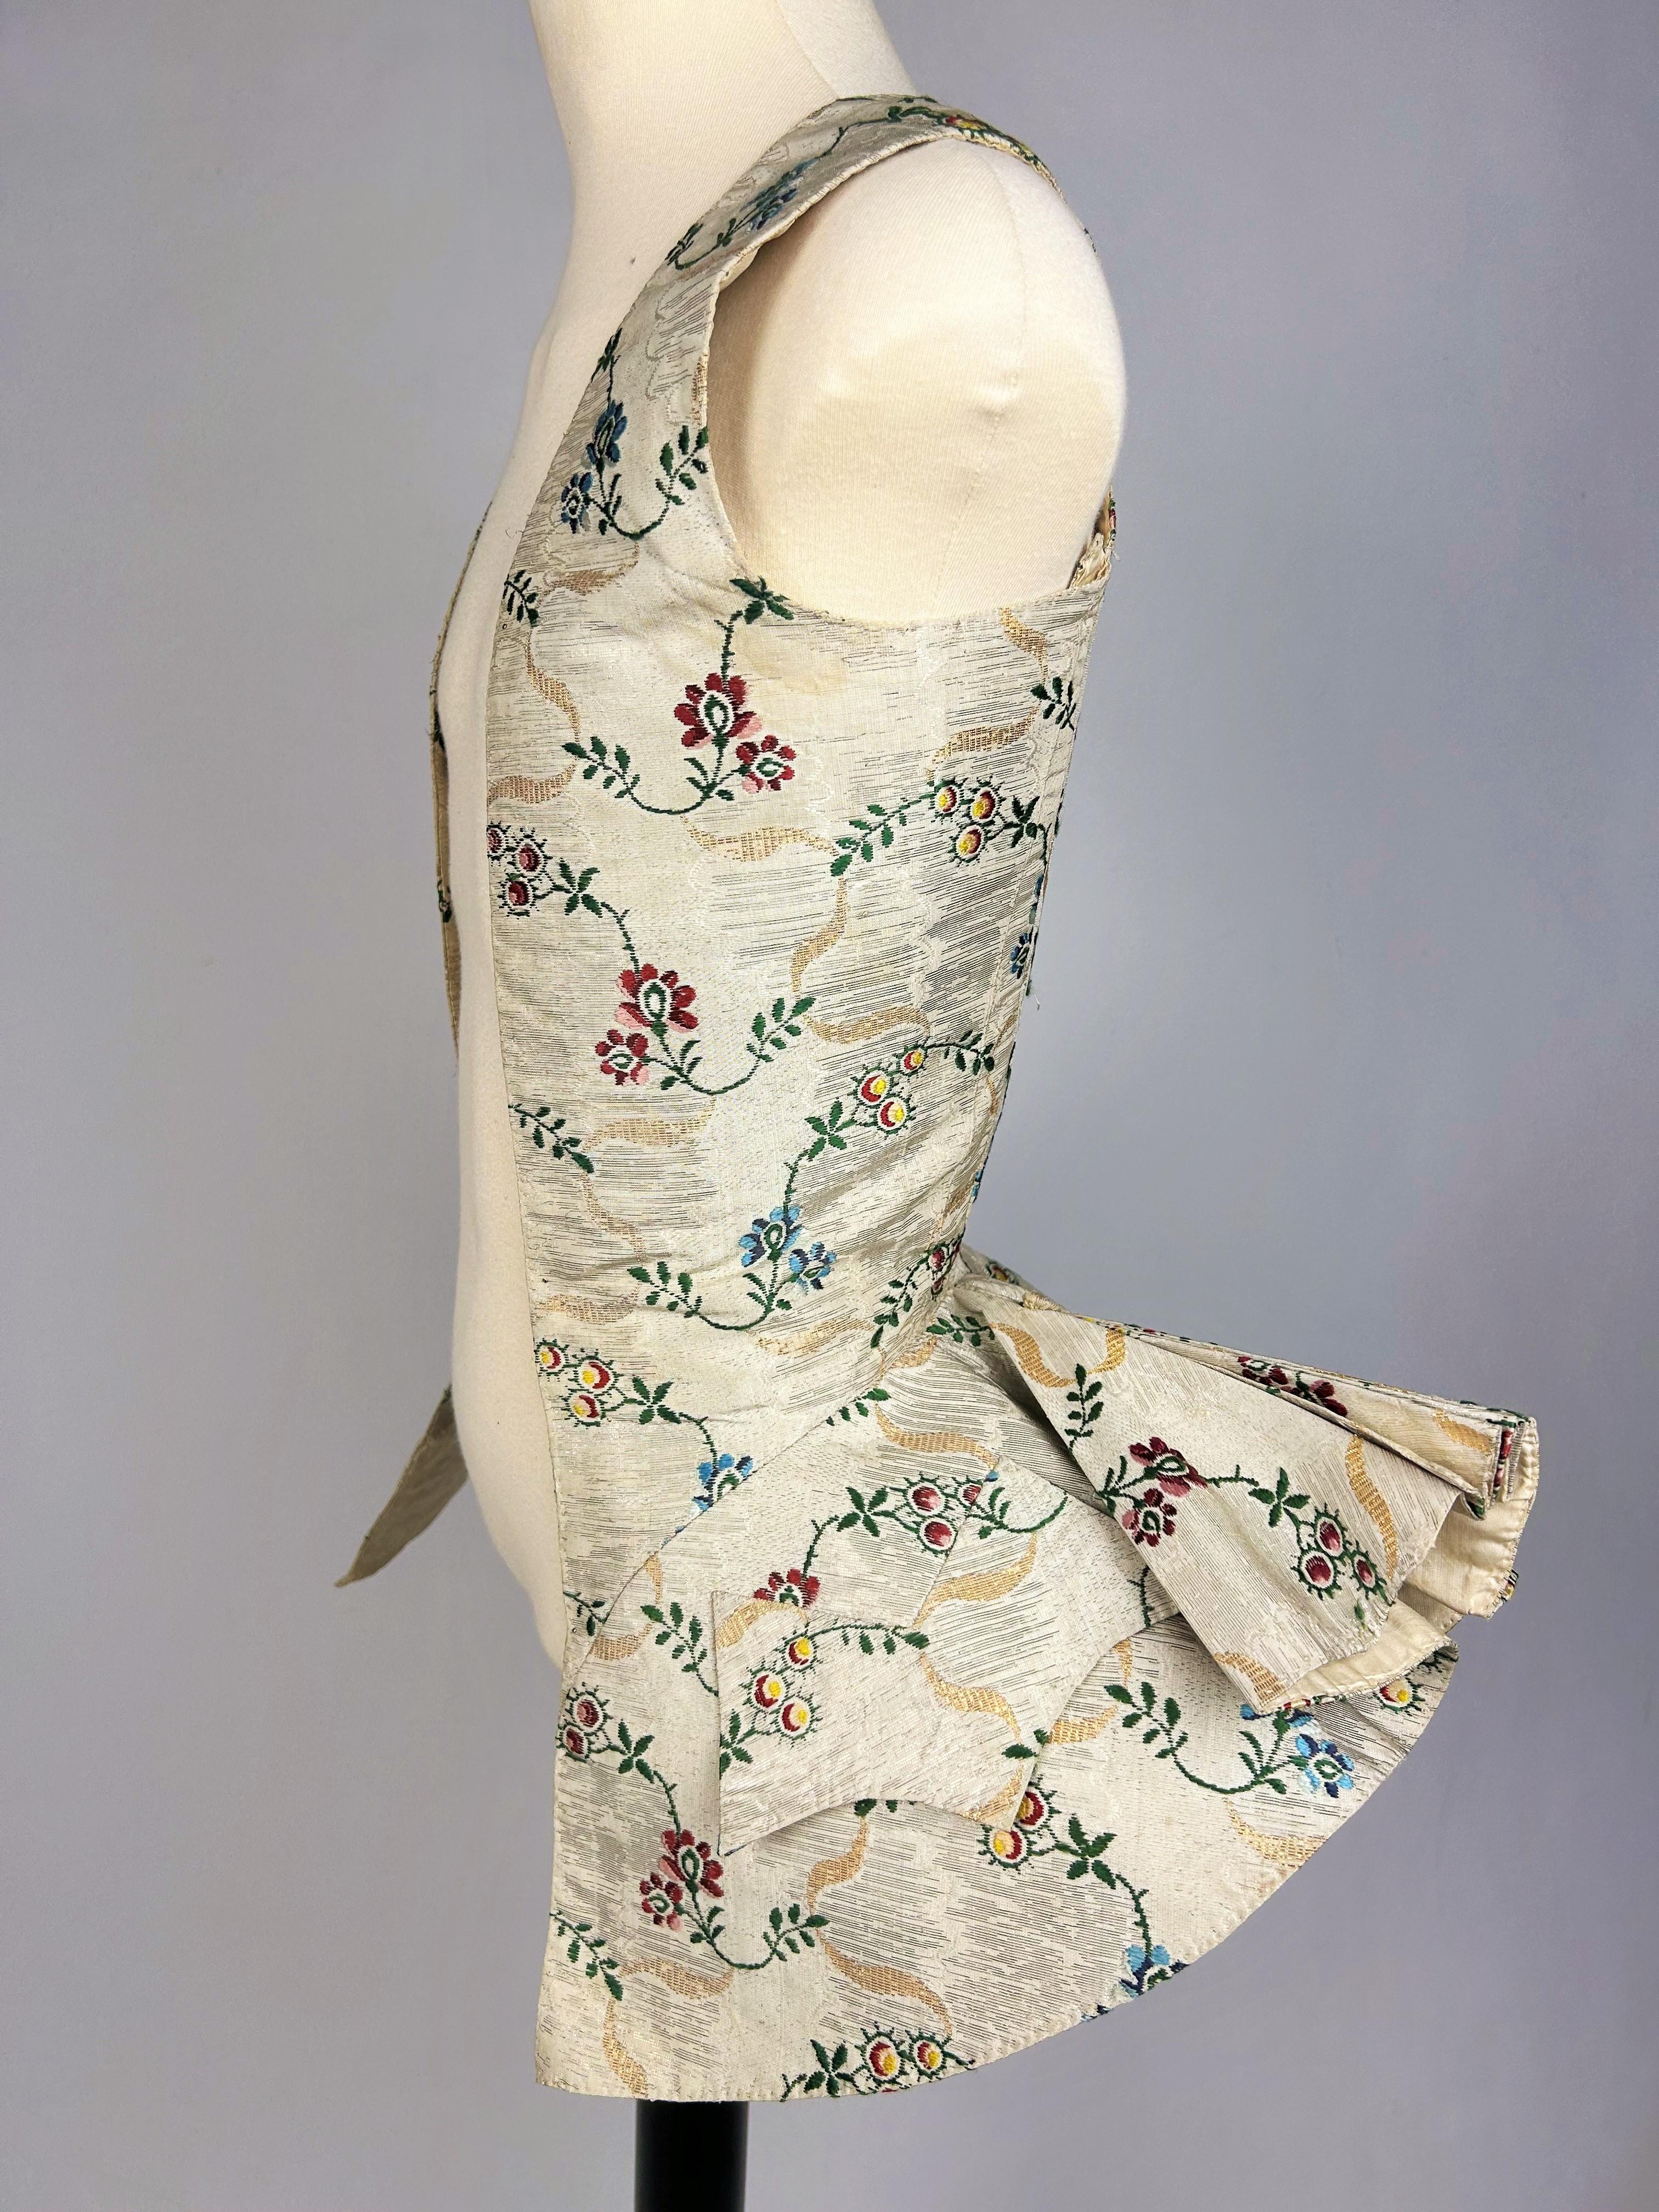 Amazon bodice in silver and gold lamé cloth - England or Europe Circa 1750-1760 For Sale 4